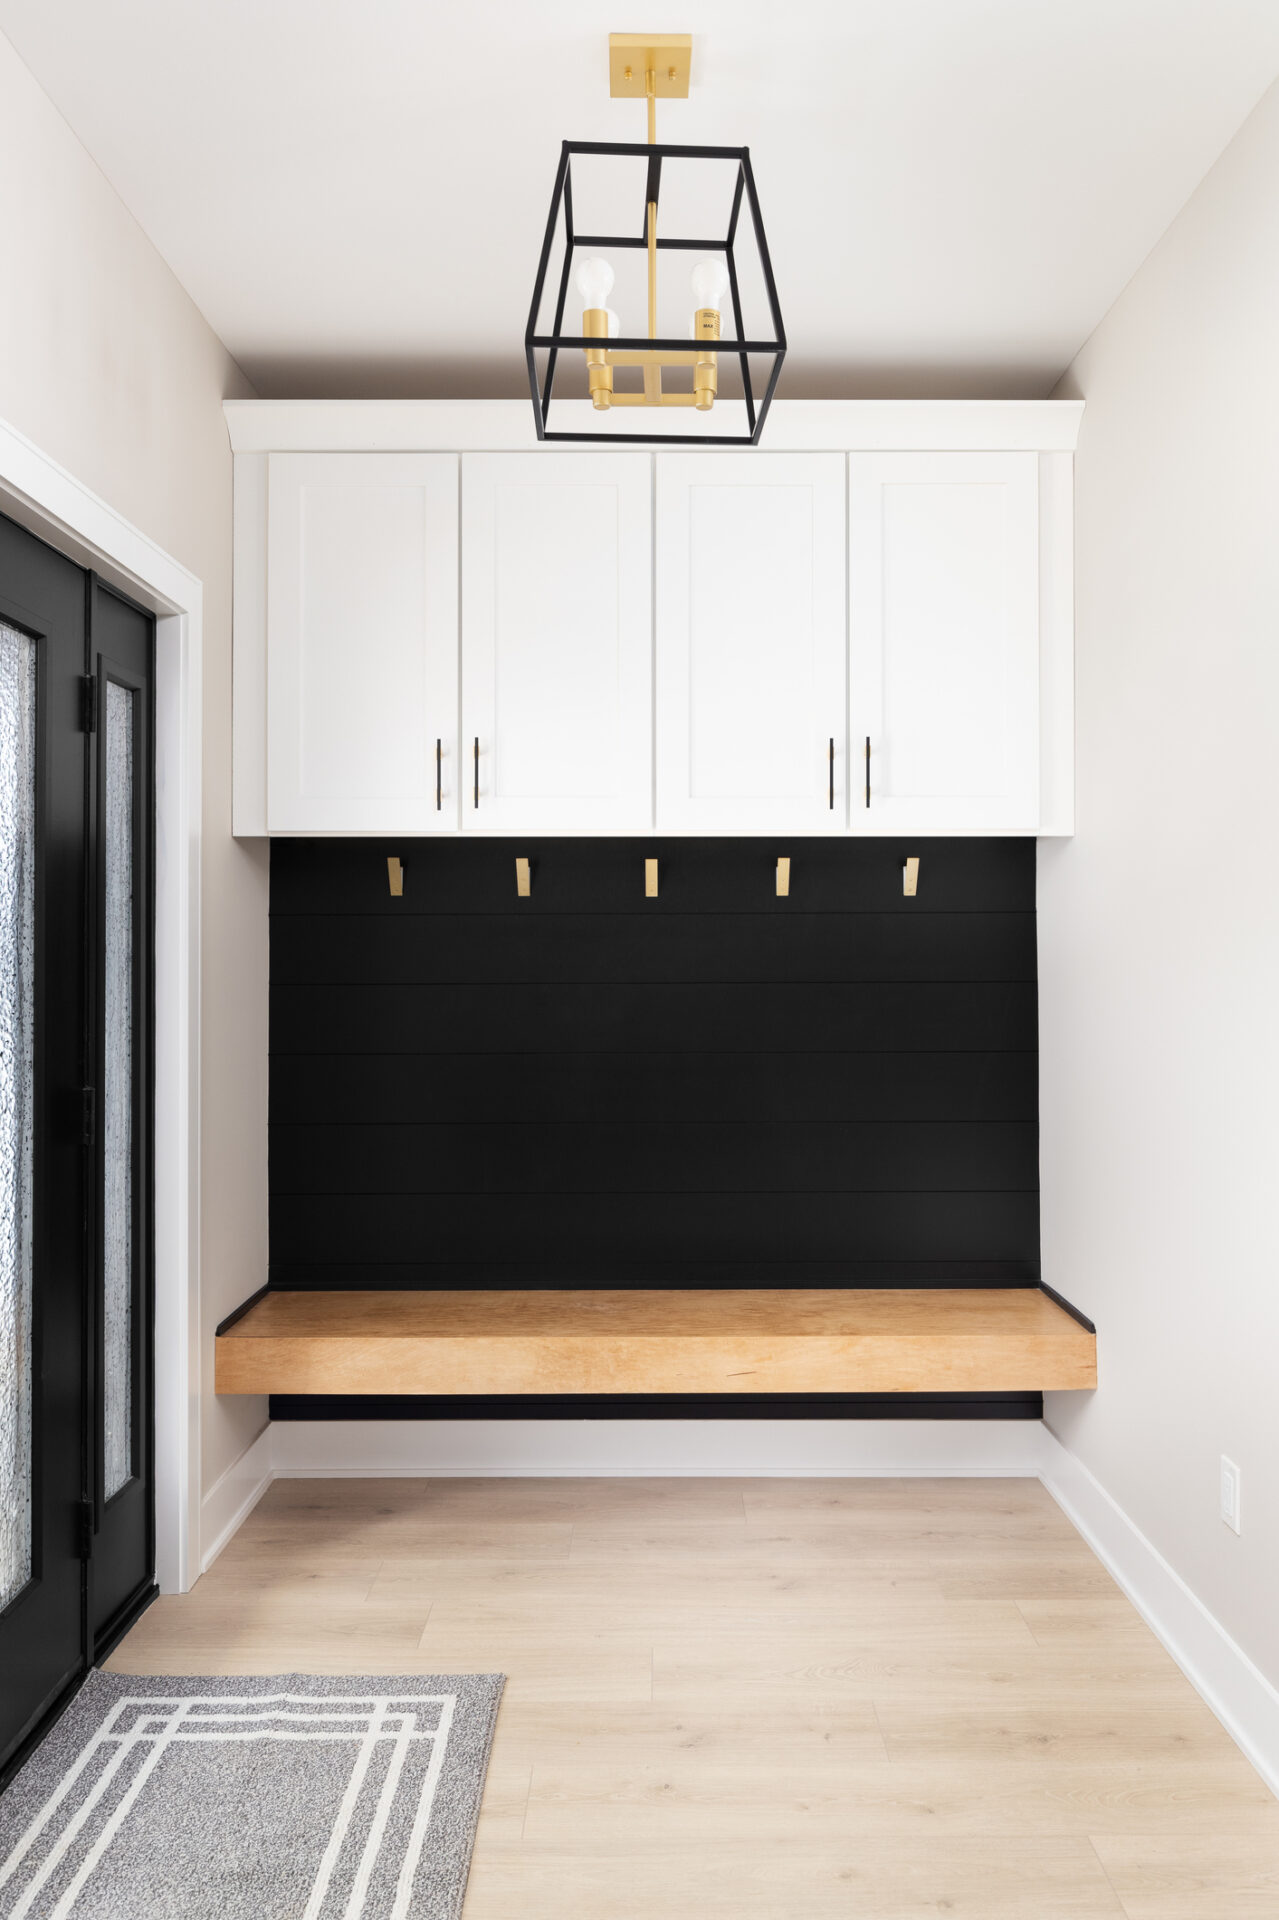 Modern interior entryway featuring white upper cabinetry, black shiplap wall, floating wooden bench, geometric chandelier, light wood floor, and a gray mat.